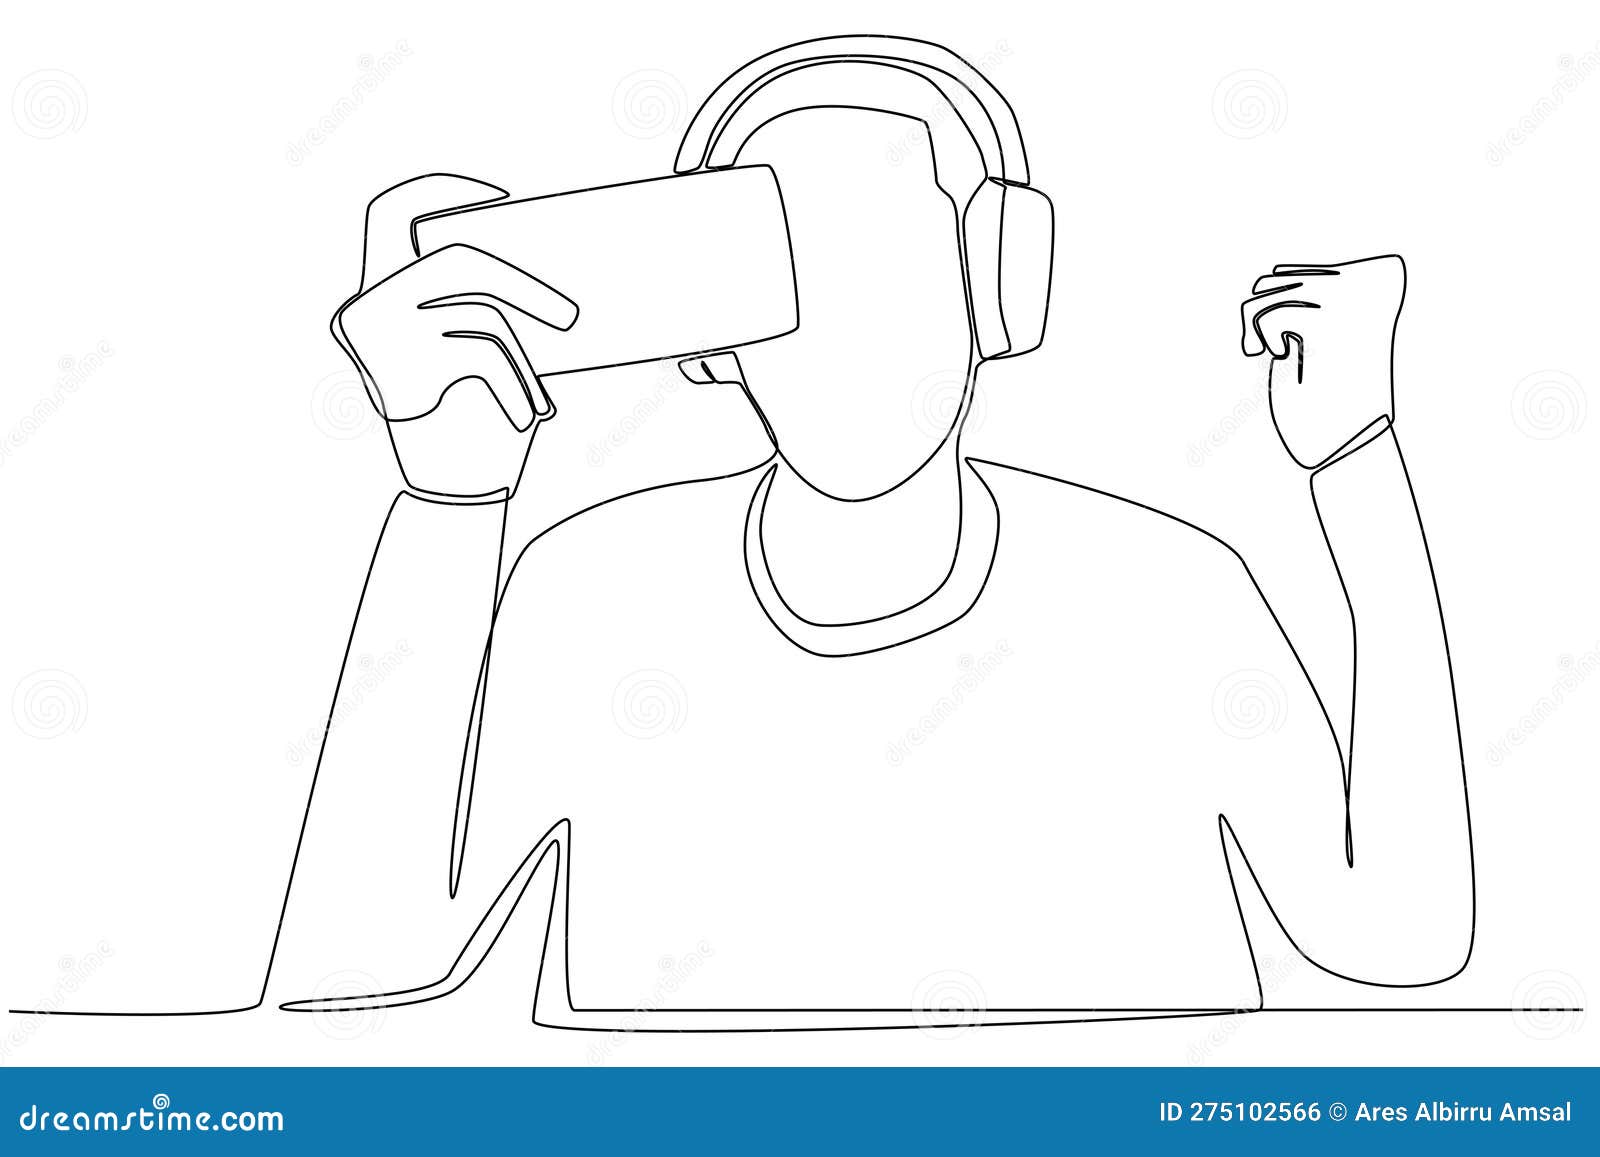 A Man Playing Online Games on a Smartphone Stock Vector